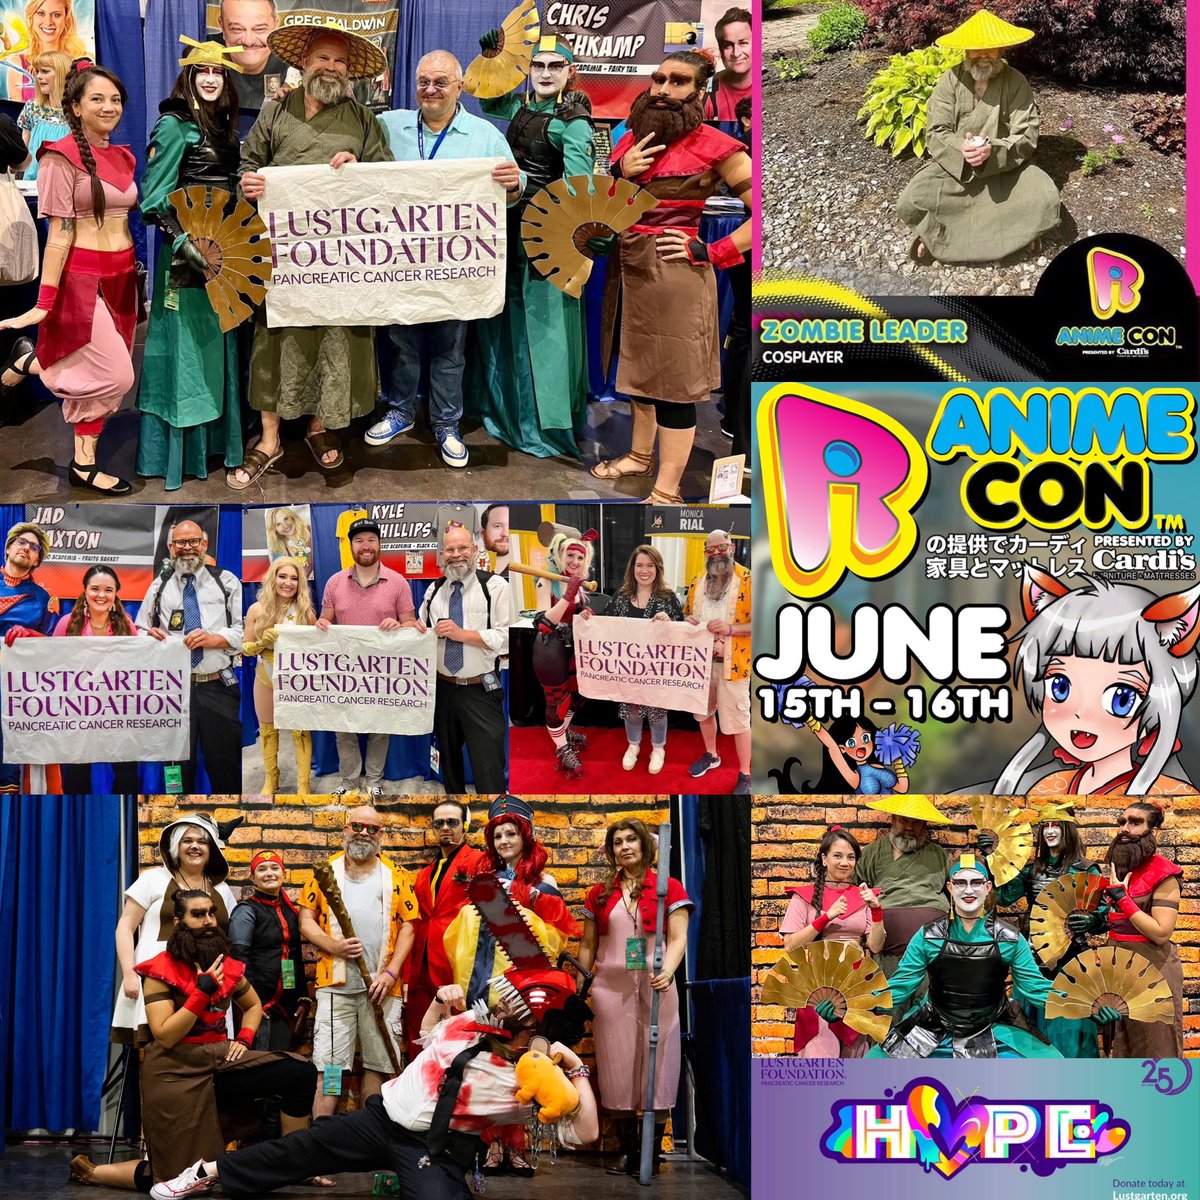 On 6/15-6/16, we’re fundraising for @lustgartenfdn at @rianimecon,
Providence, RI!  After visiting talent such as @GregBaldwinIroh, @Rialisms, @KylePhillipsFun & @jadbsaxton, please swing by and donate to fund pancreatic cancer research. @wpri12 @RIMonthly @RITourism @MotifMagRI